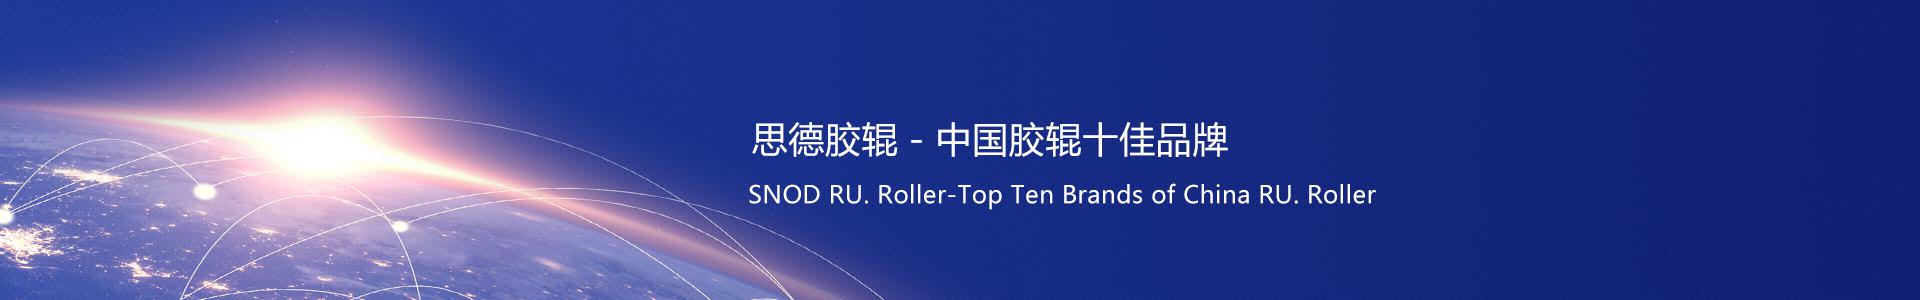 Rubber roll, corona rubber roll, ndustrial rubber roll, Shanghai SNOD Rubber Roll (Noqing Roller) Co., Ltd. Cot Overall Solution Supplier!